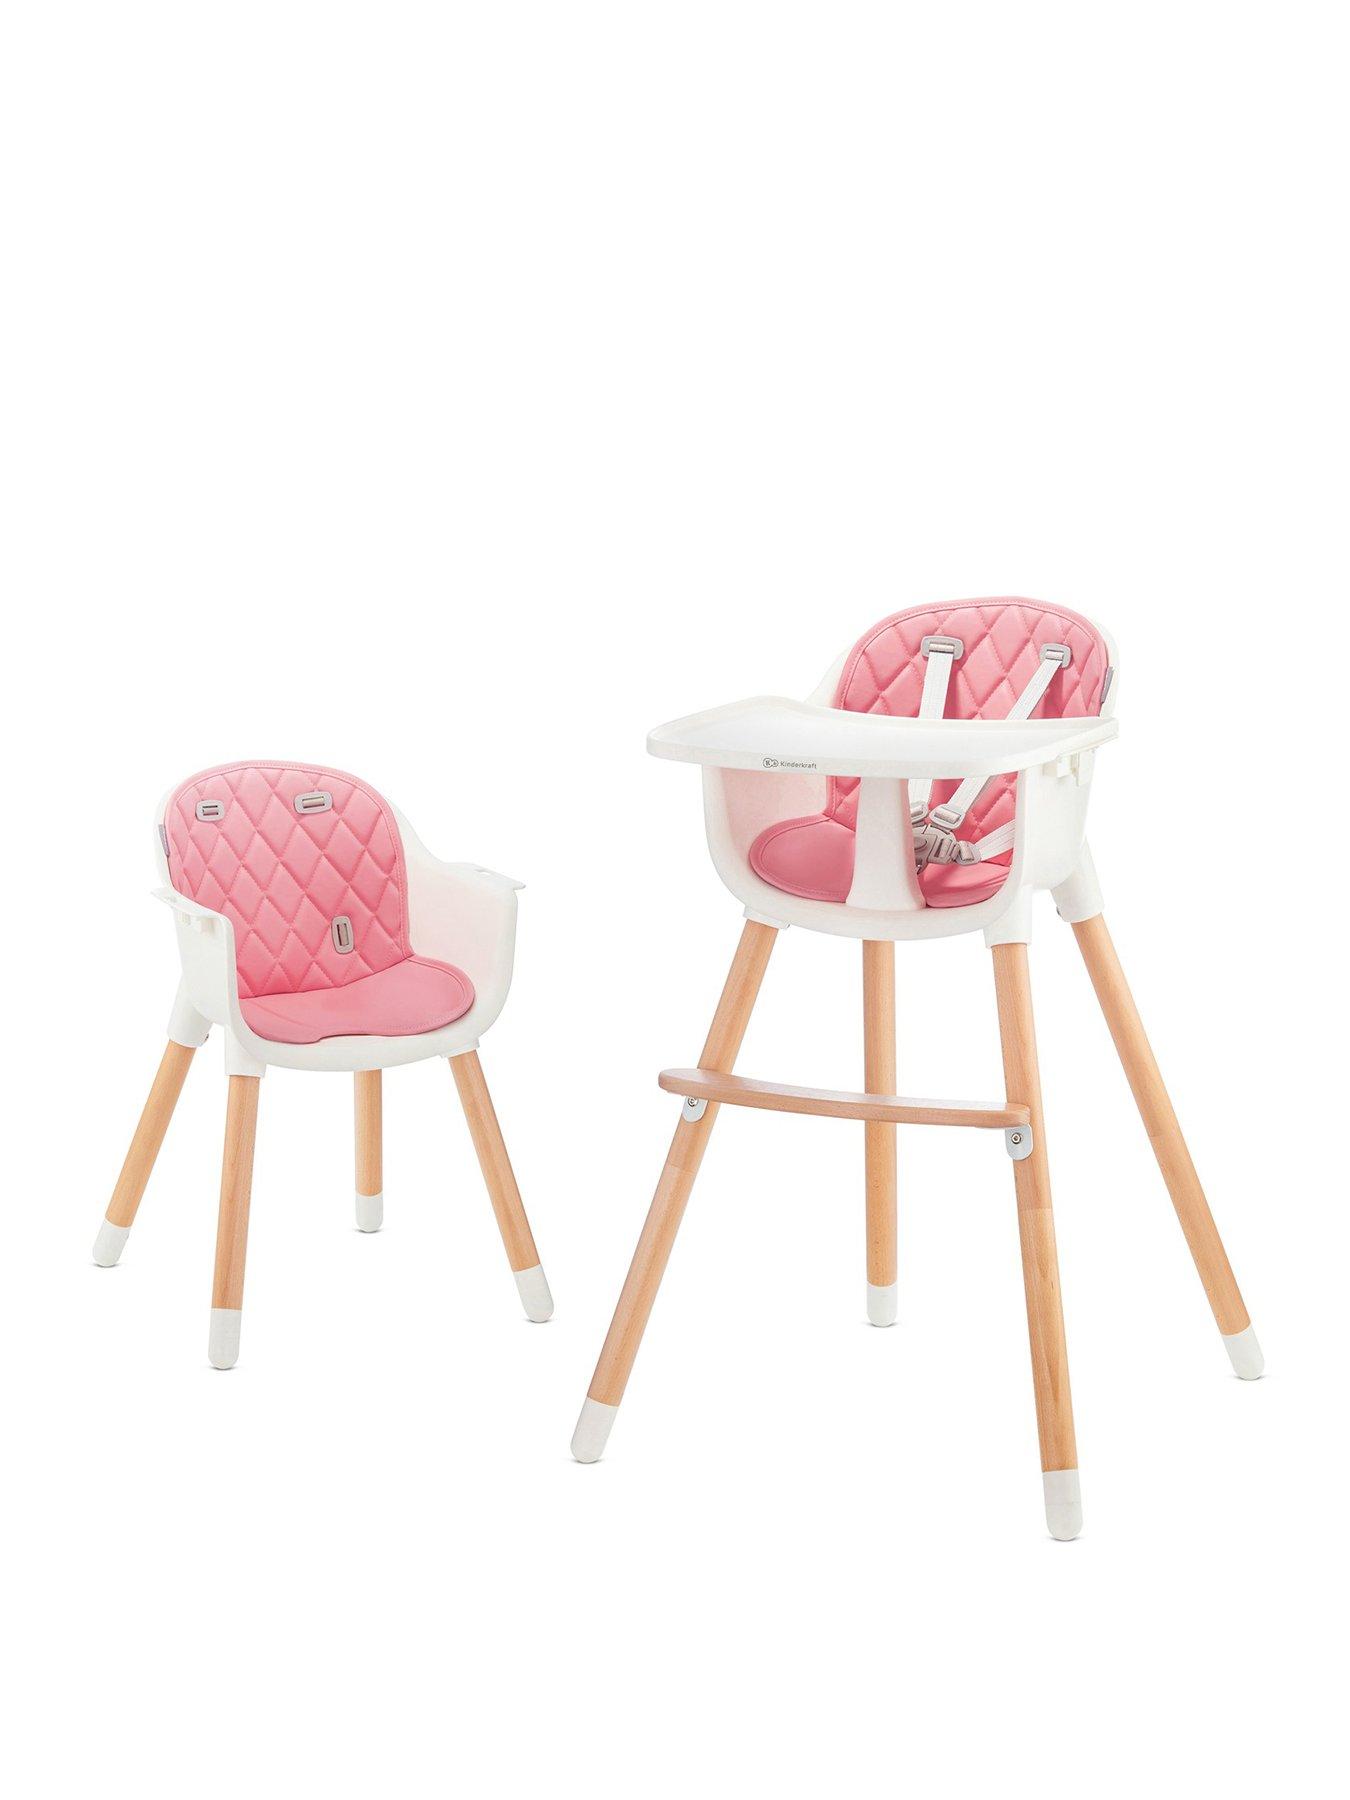 My Babiie Unicorn Compact Highchair  MBHC1UN from 6 months up tp 15kg 